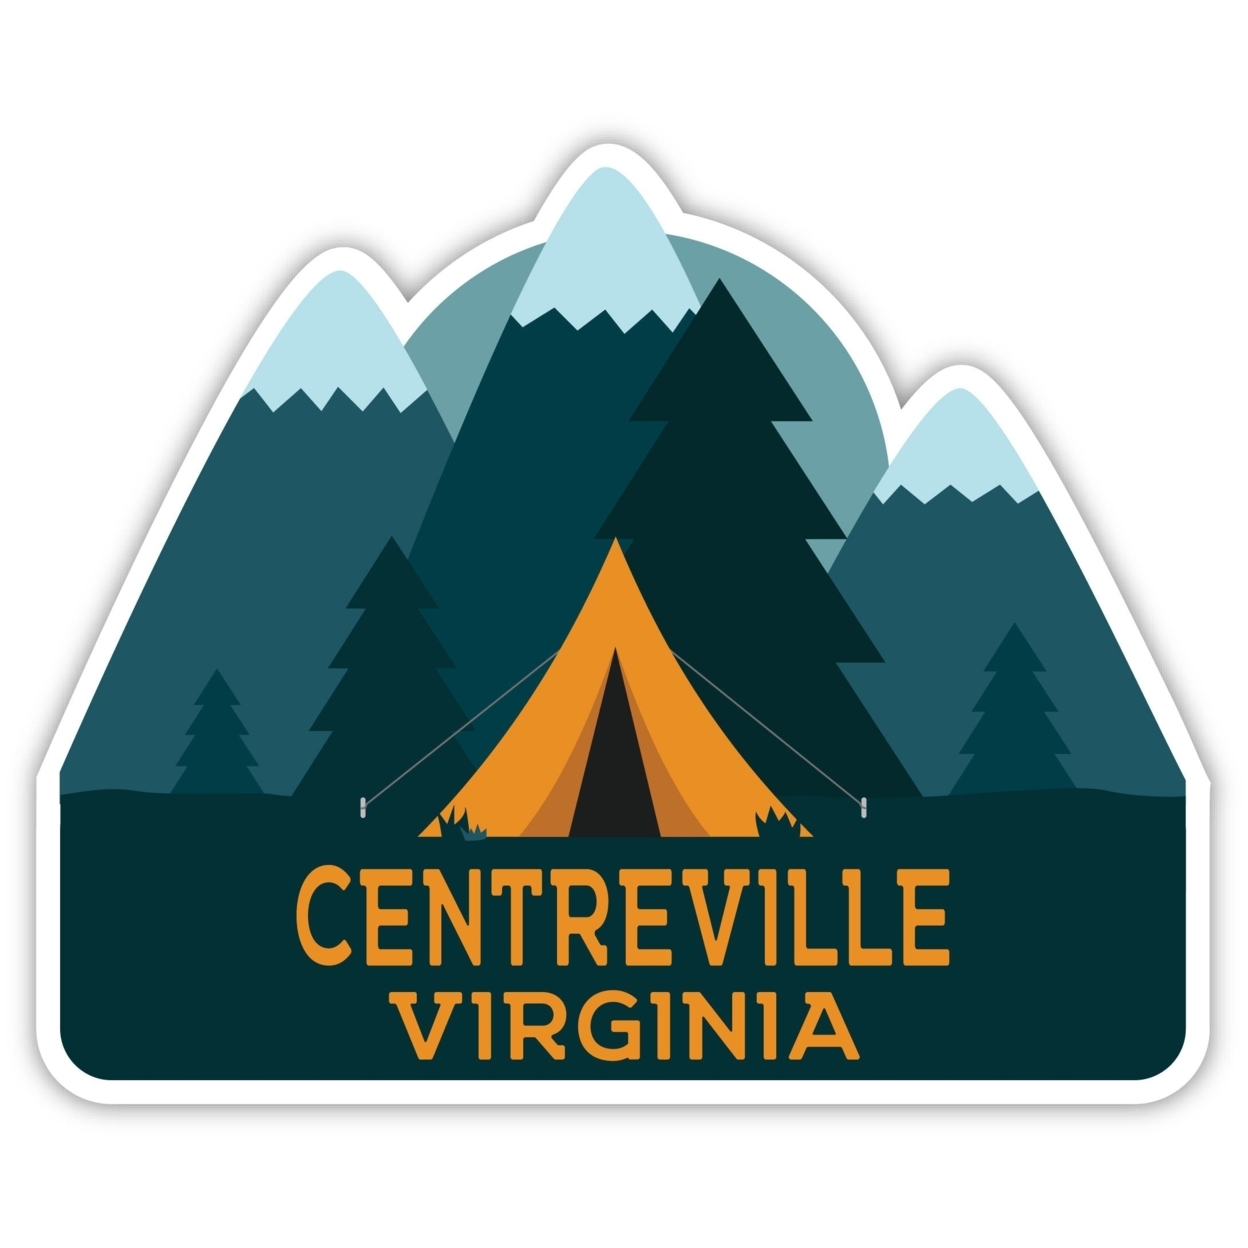 Centreville Virginia Souvenir Decorative Stickers (Choose Theme And Size) - 4-Pack, 4-Inch, Tent